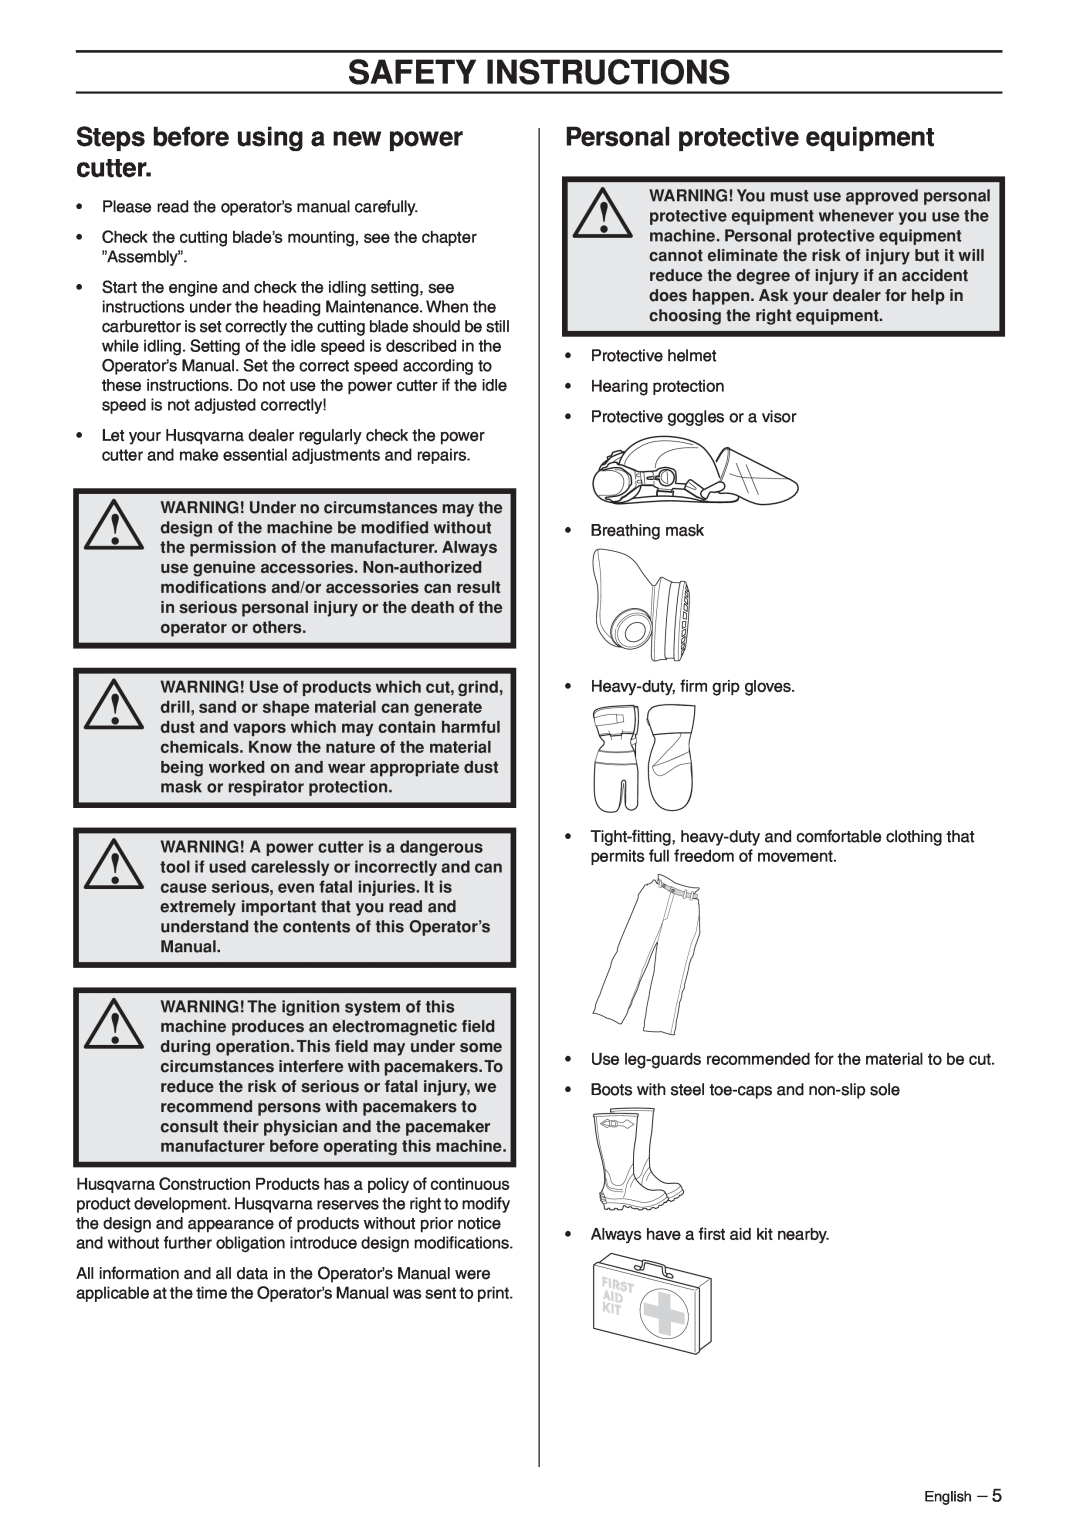 Husqvarna K950 manual Safety Instructions, Steps before using a new power cutter, Personal protective equipment 